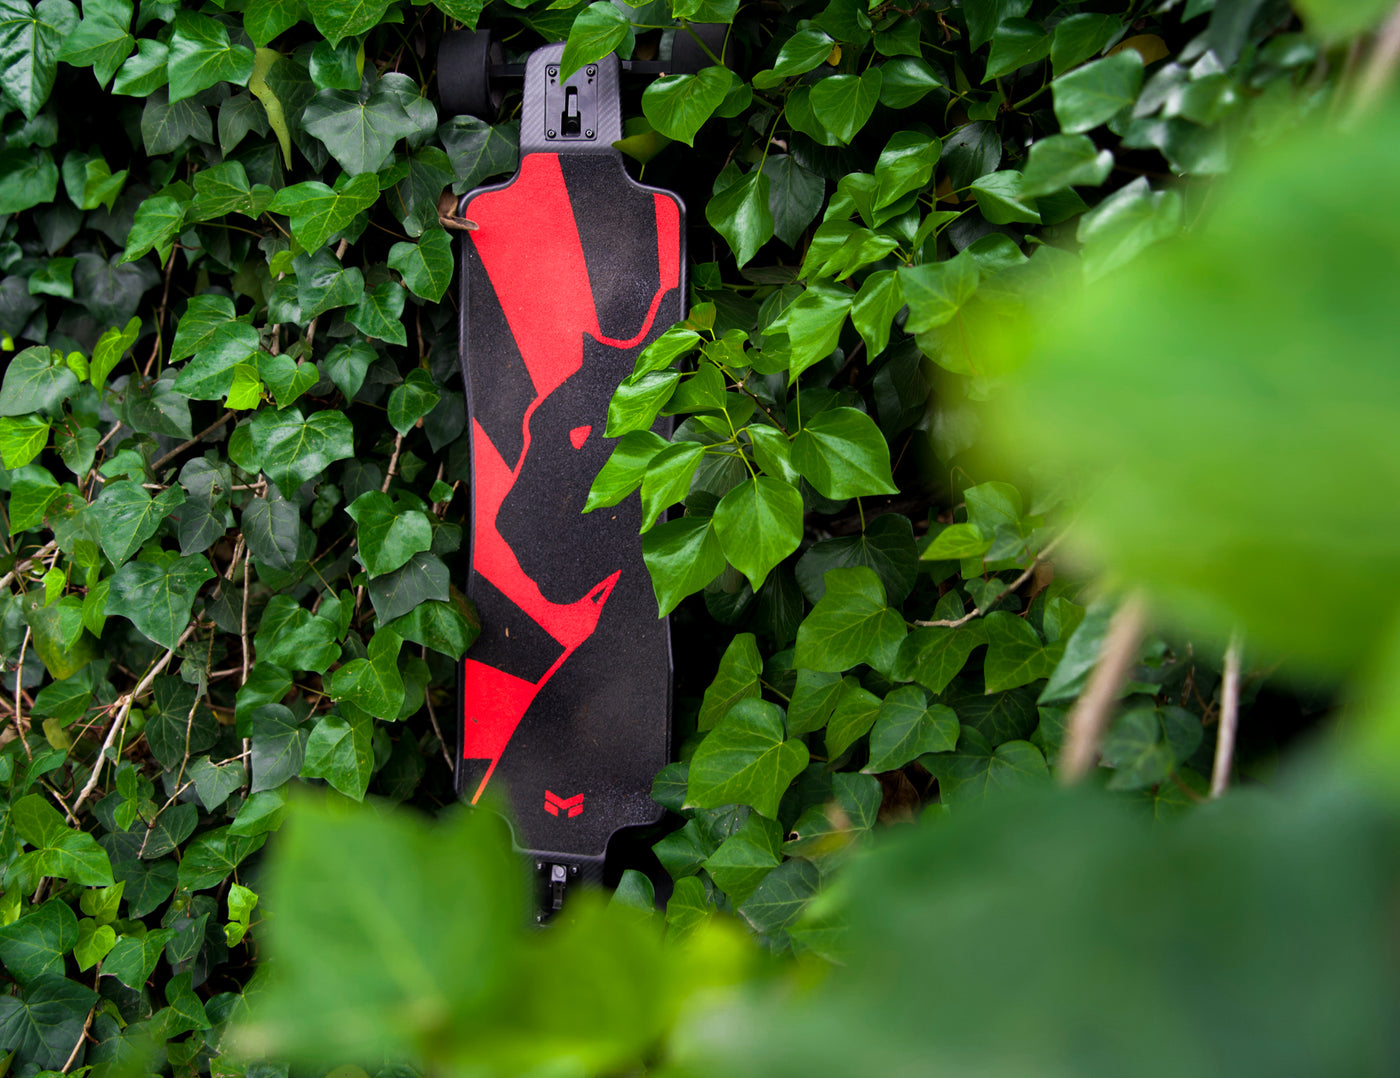 Sex Panther Electric Skateboard in the wild